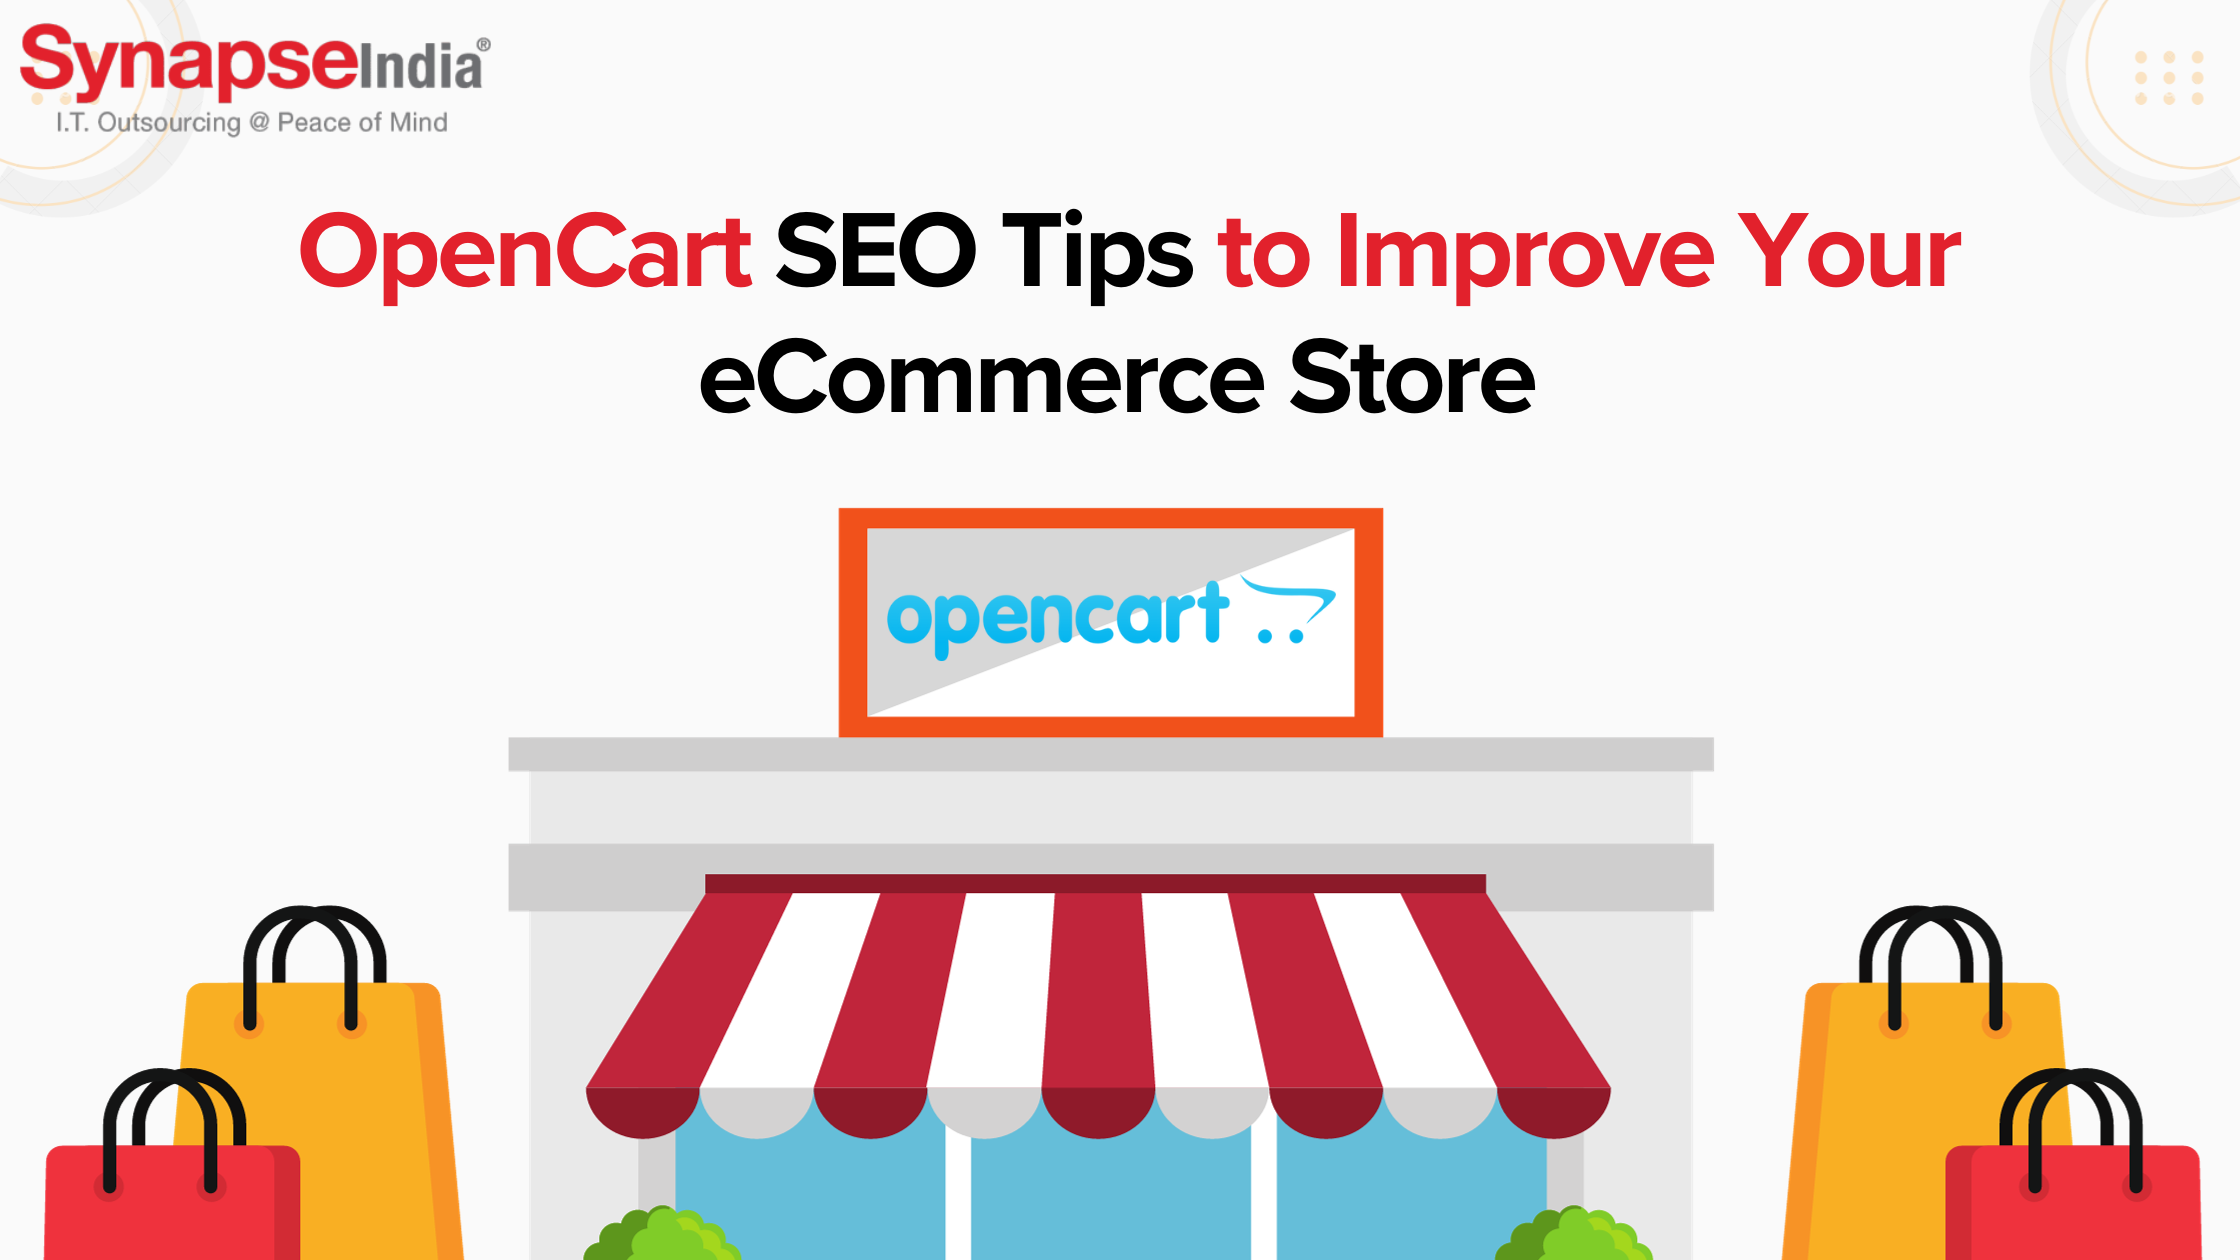 OpenCart SEO Tips to Improve Your eCommerce Store | TechPlanet